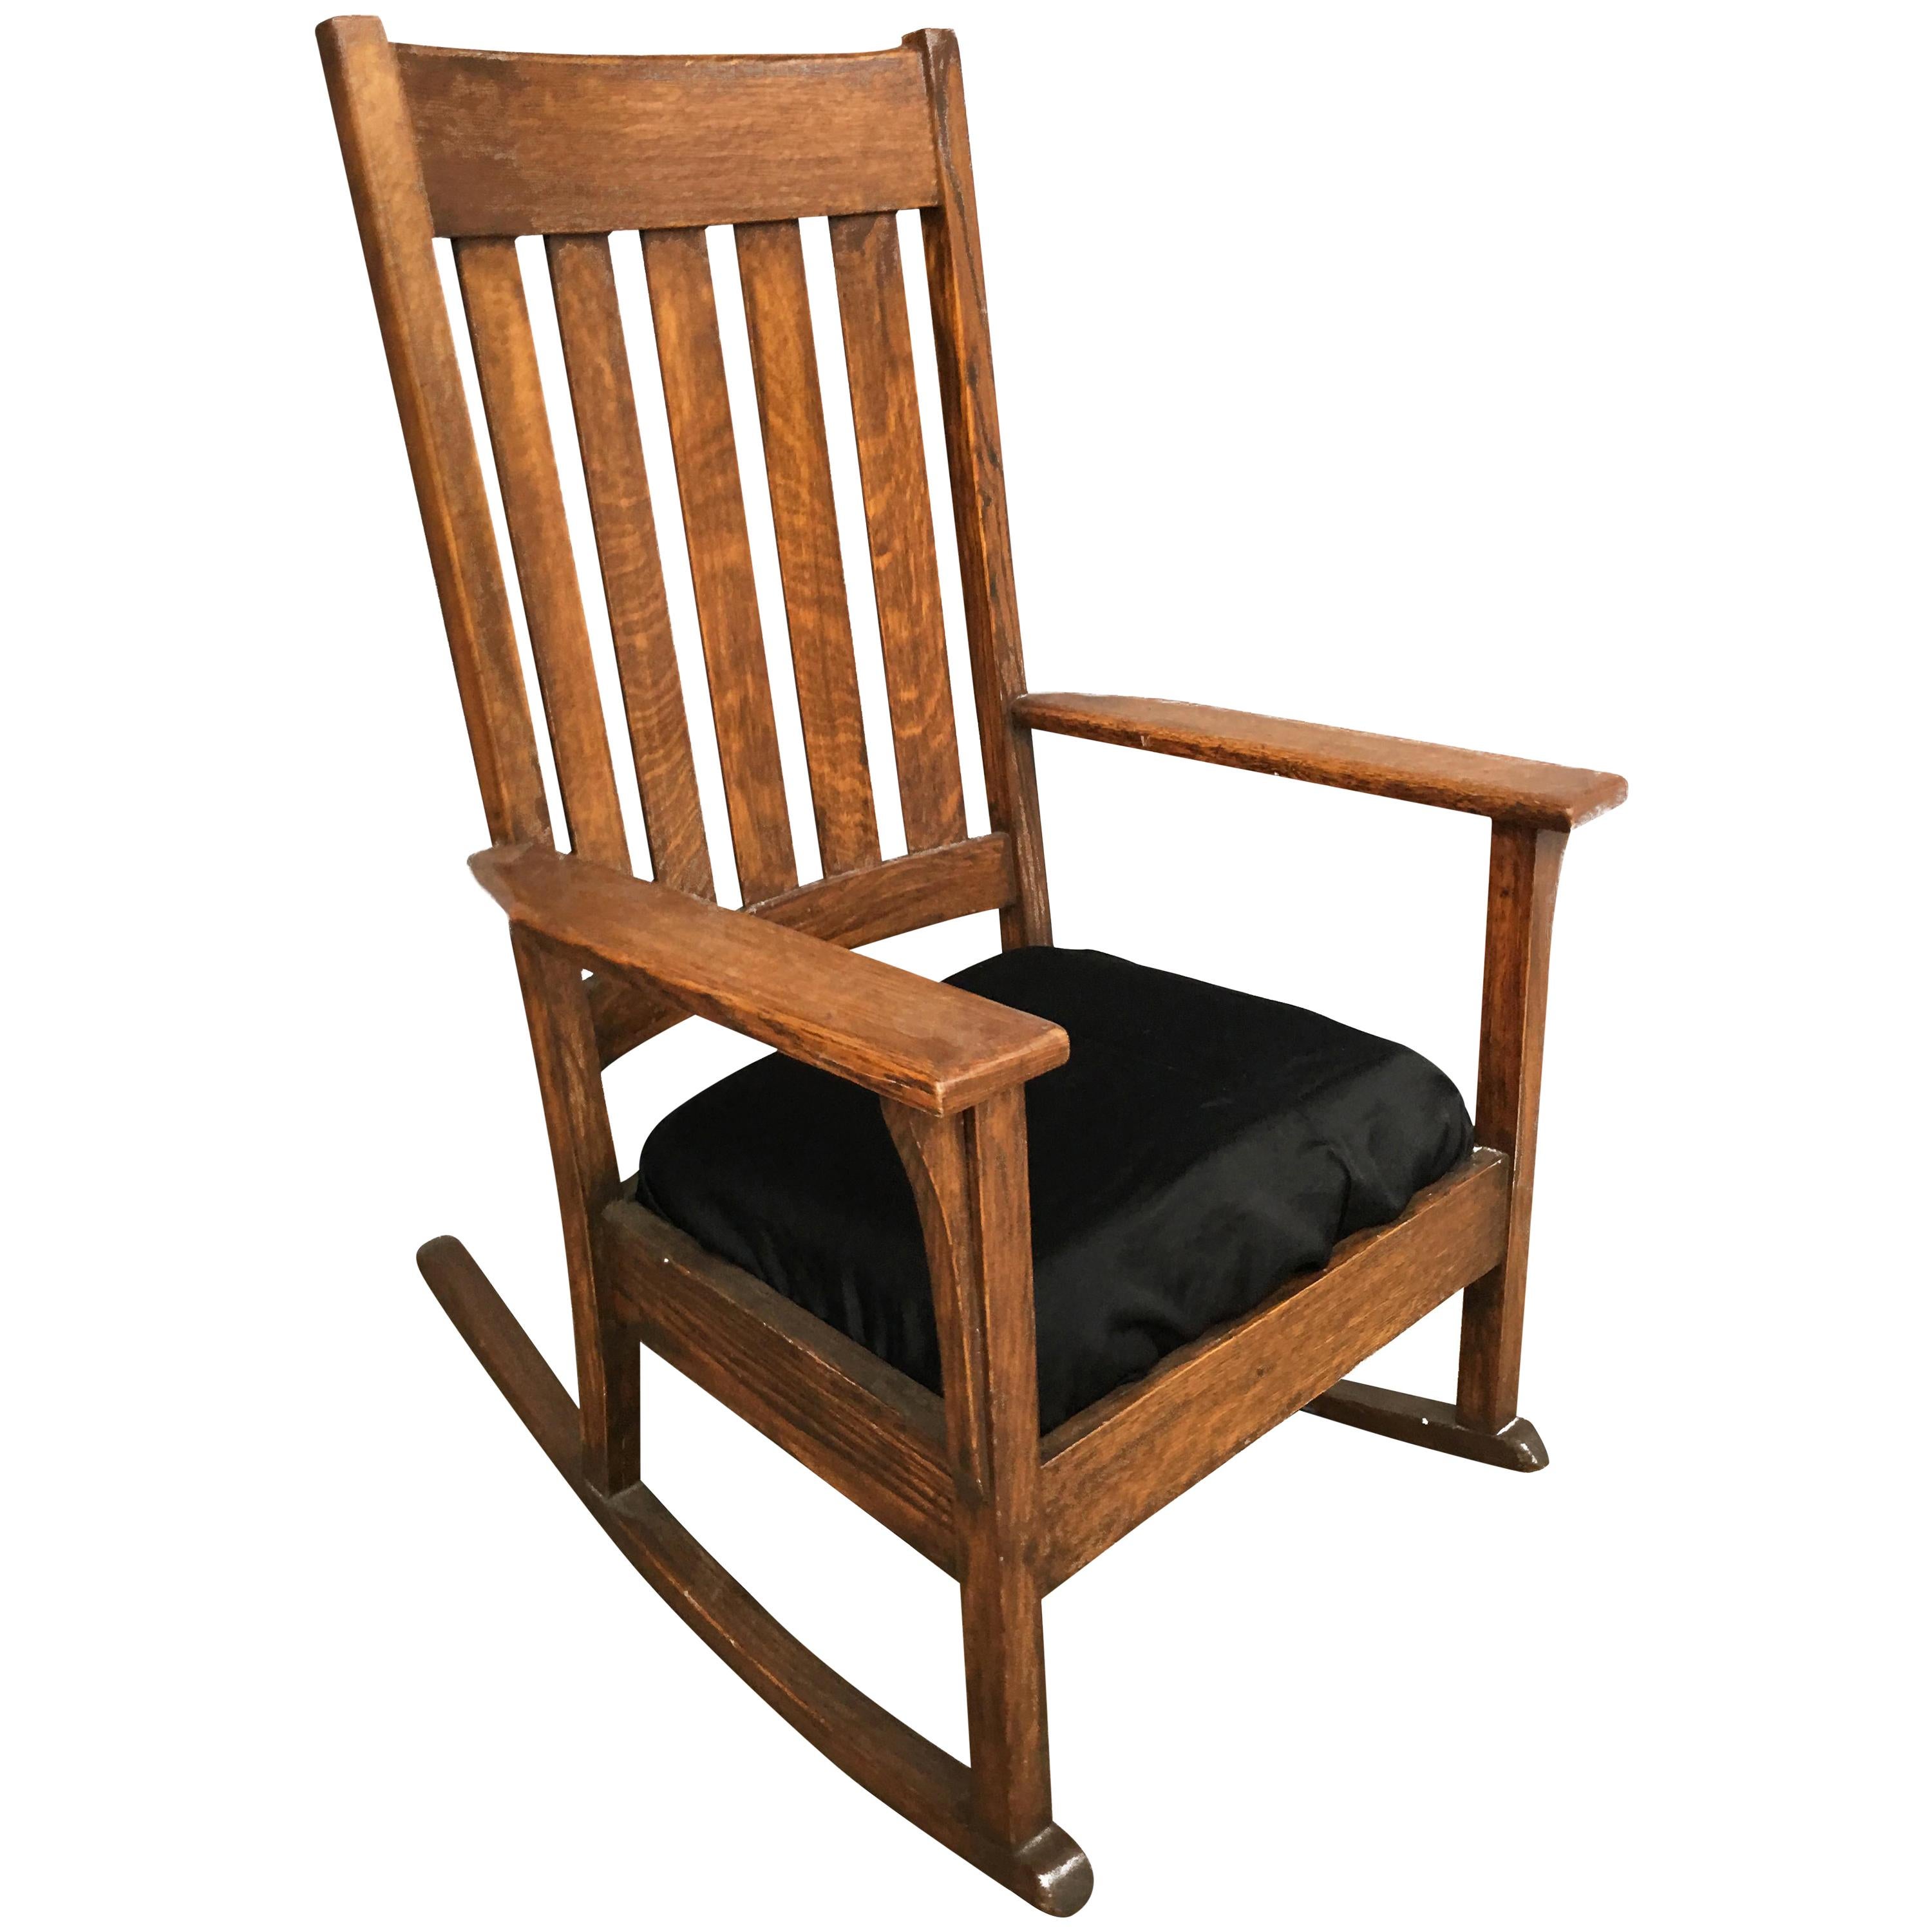 Mission Chestnut Slat Back Rocking Chair by National Chair Co.